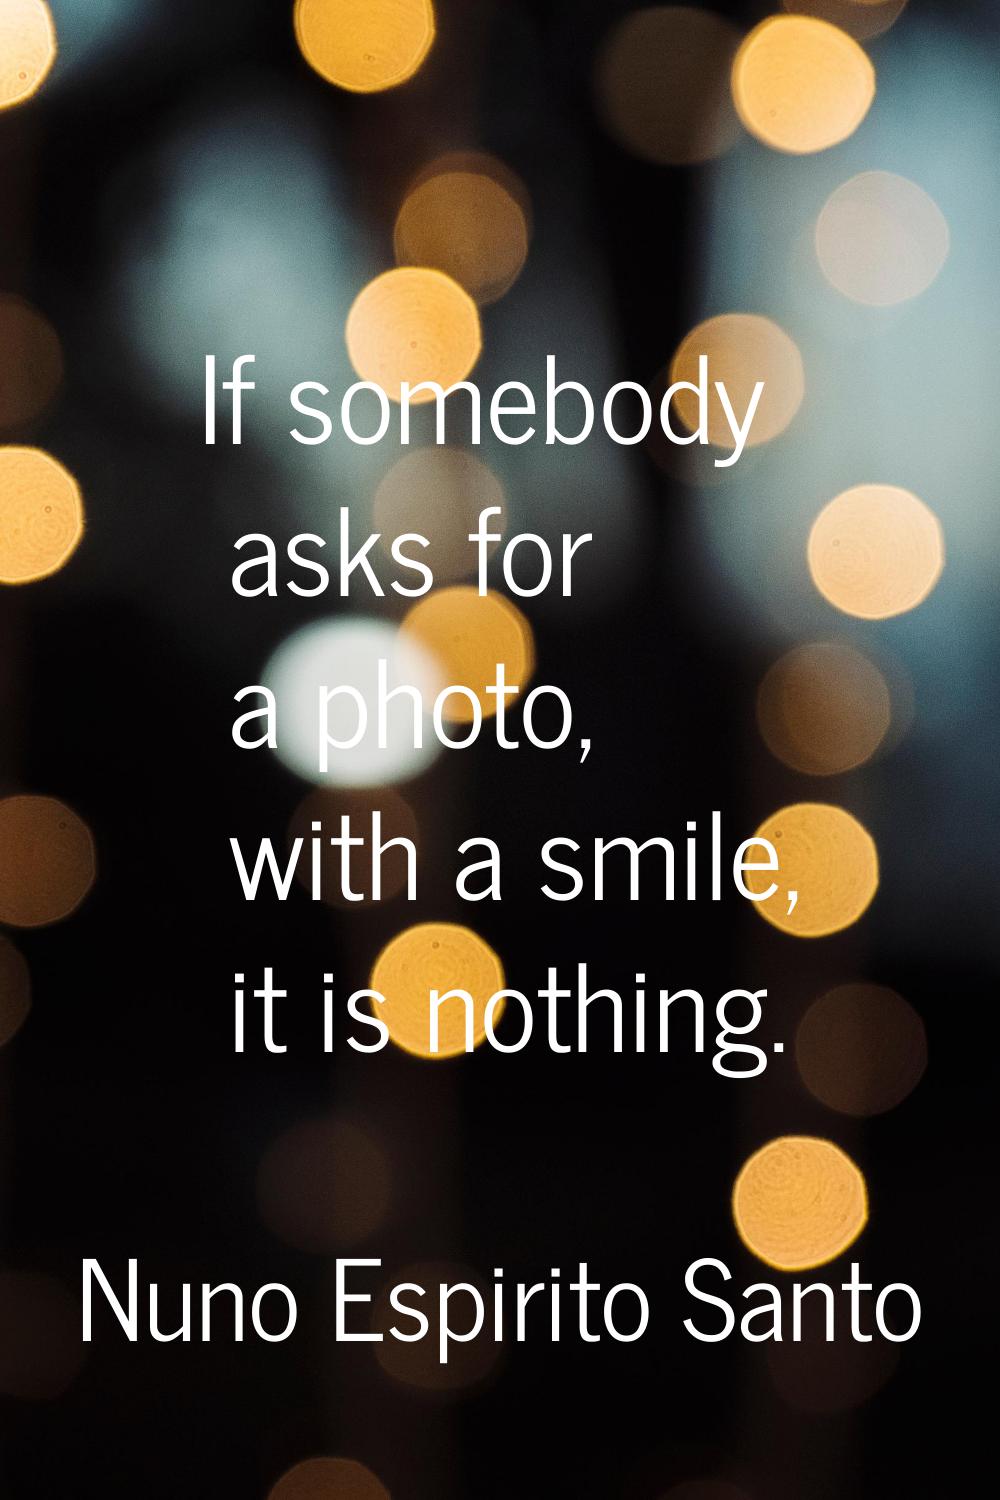 If somebody asks for a photo, with a smile, it is nothing.